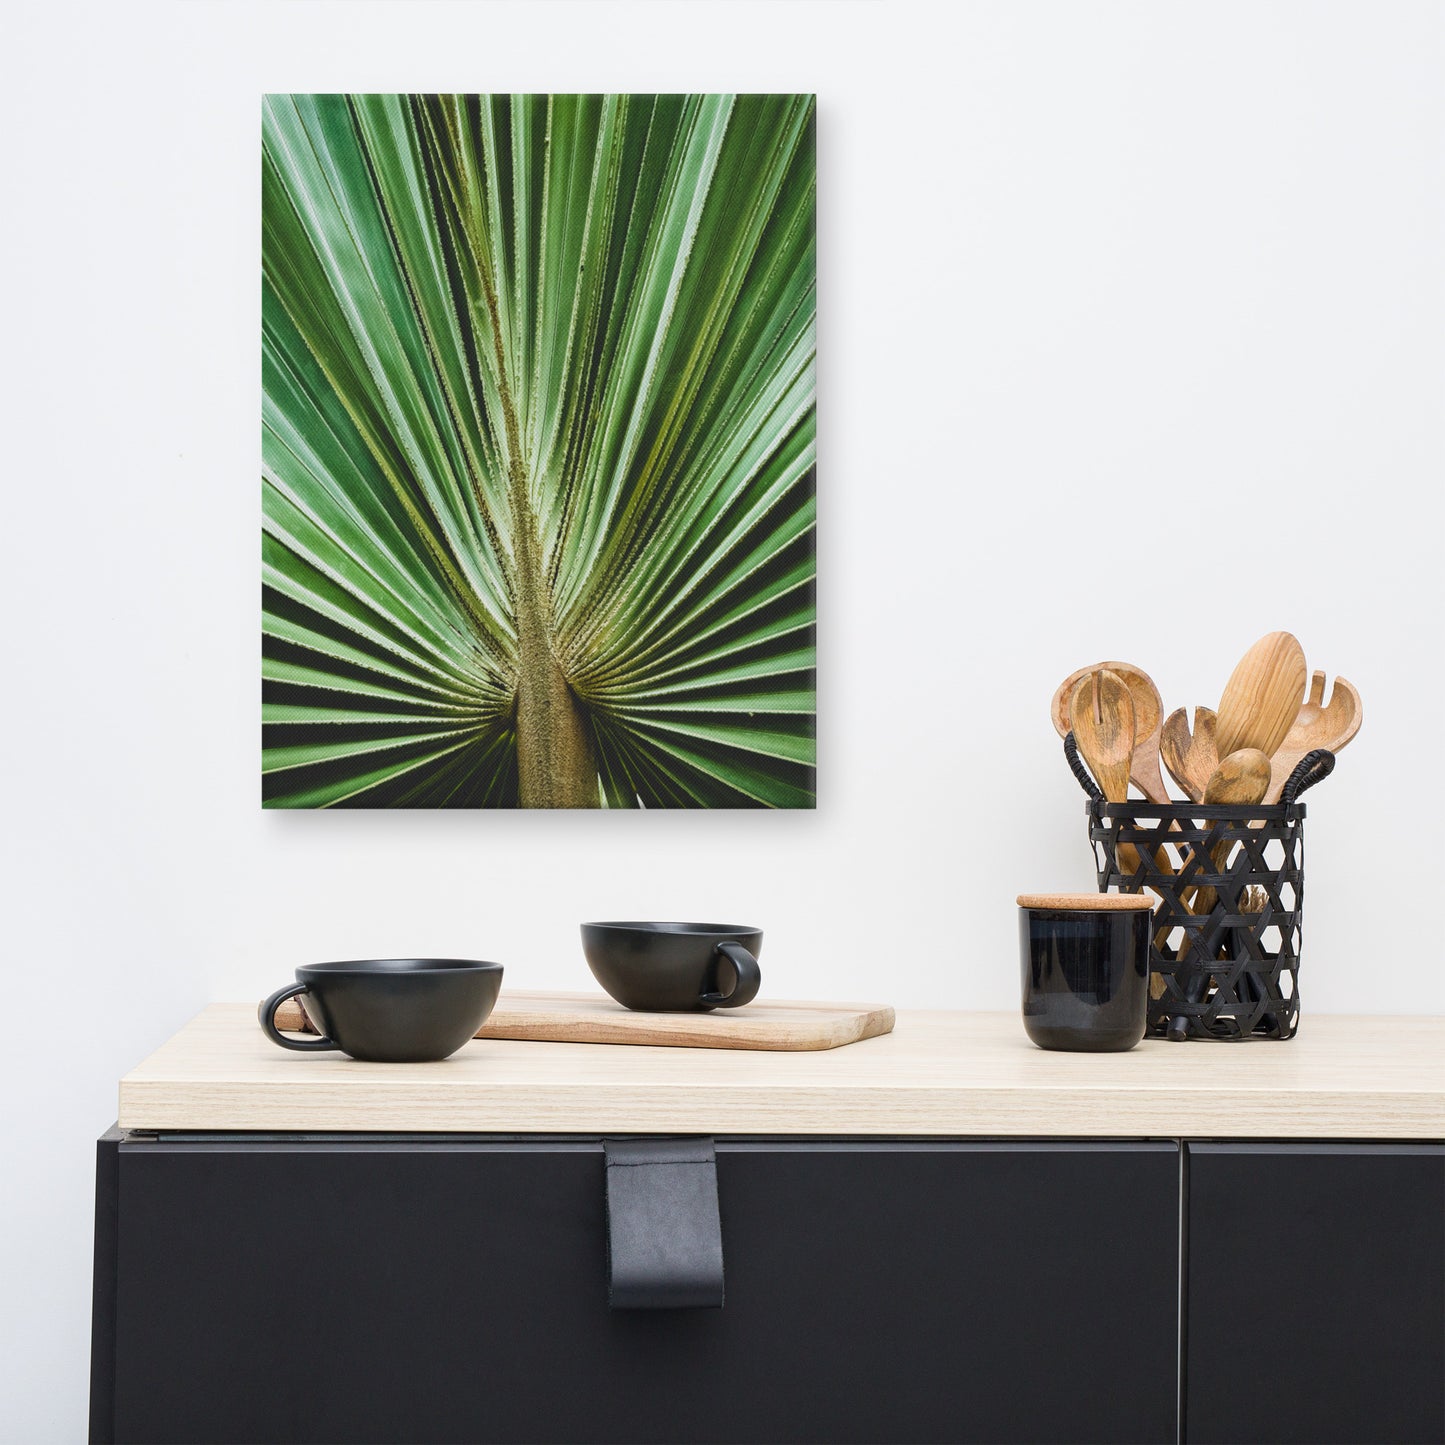 Elegant Dining Room Wall Decor: Aged and Colorized Wide Palm Leaves 2 - Botanical / Plants Nature Photograph Canvas Wall Art Print - Artwork